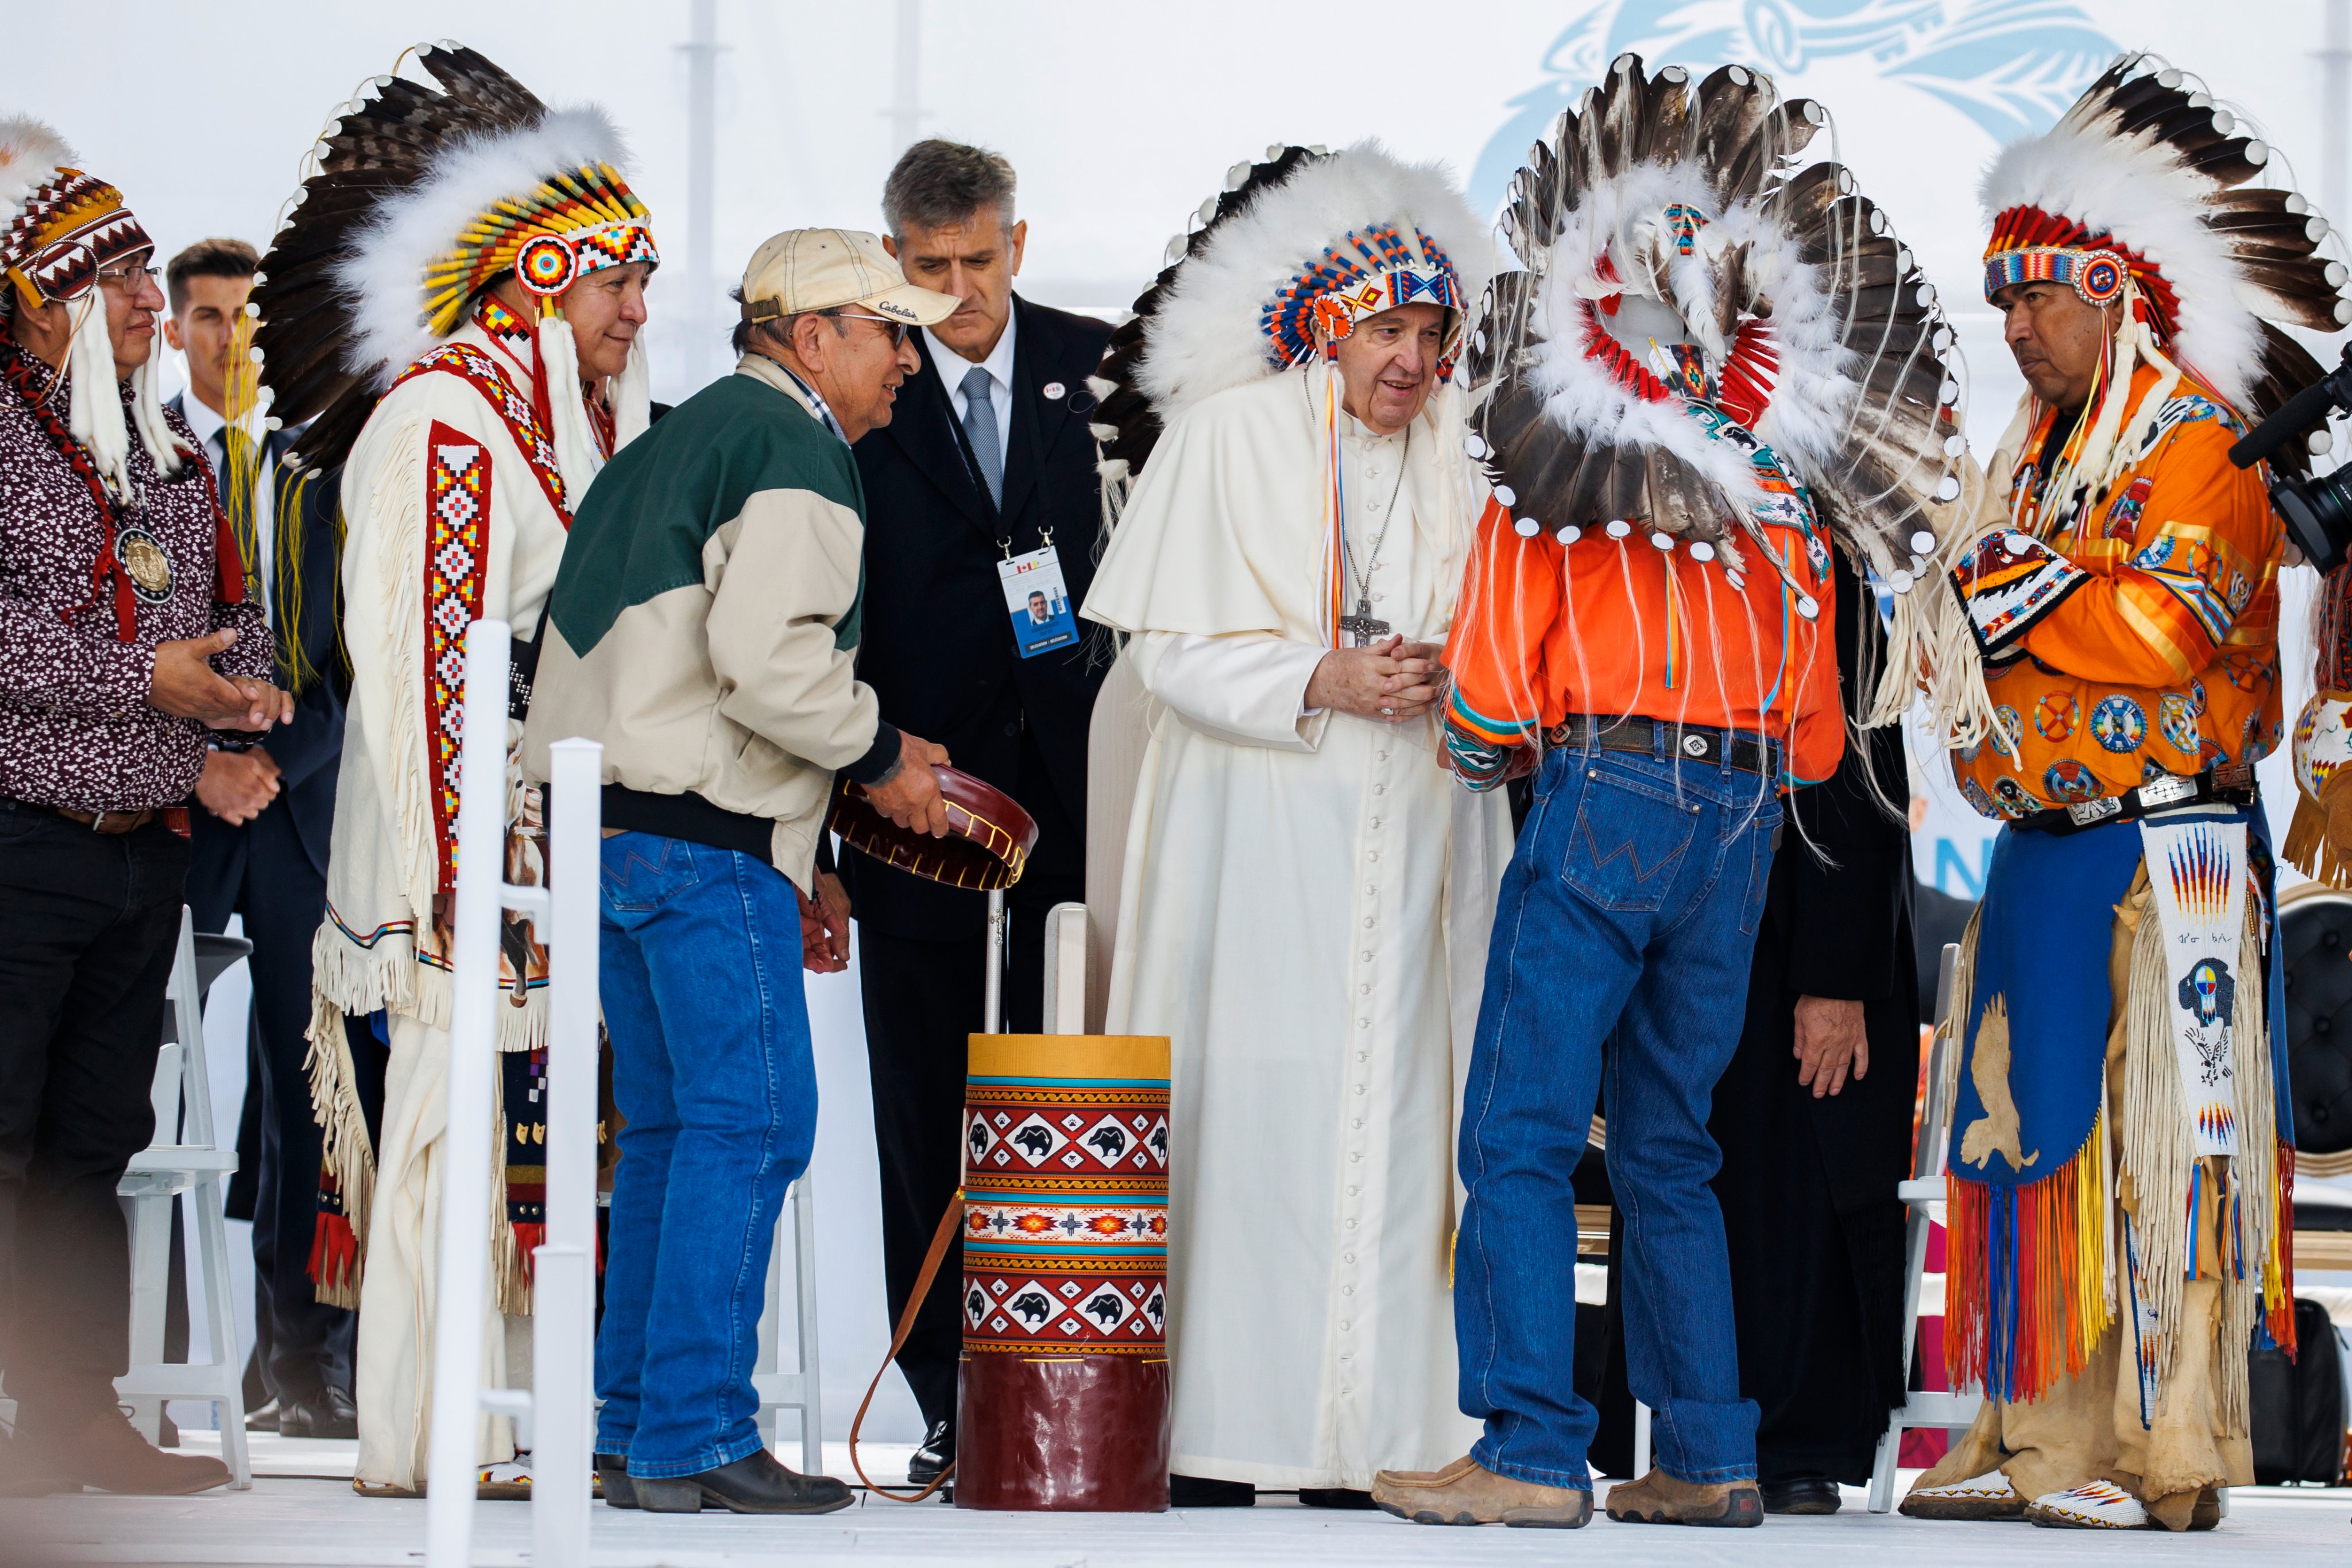 Pope Francis Visits Canada To Meet With Indigenous Communities